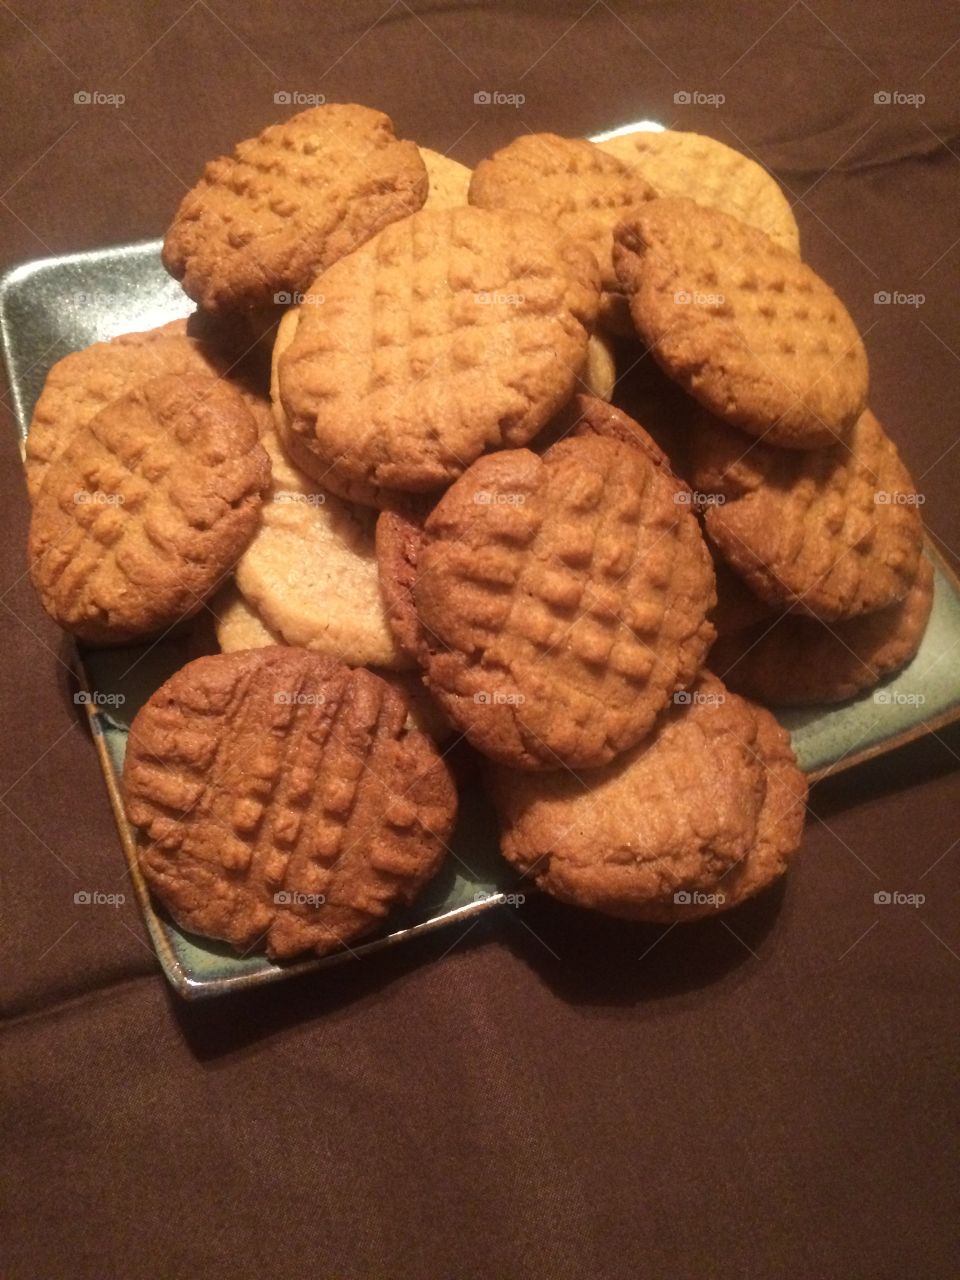 4 ingredient peanut butter cookies who knew hmm